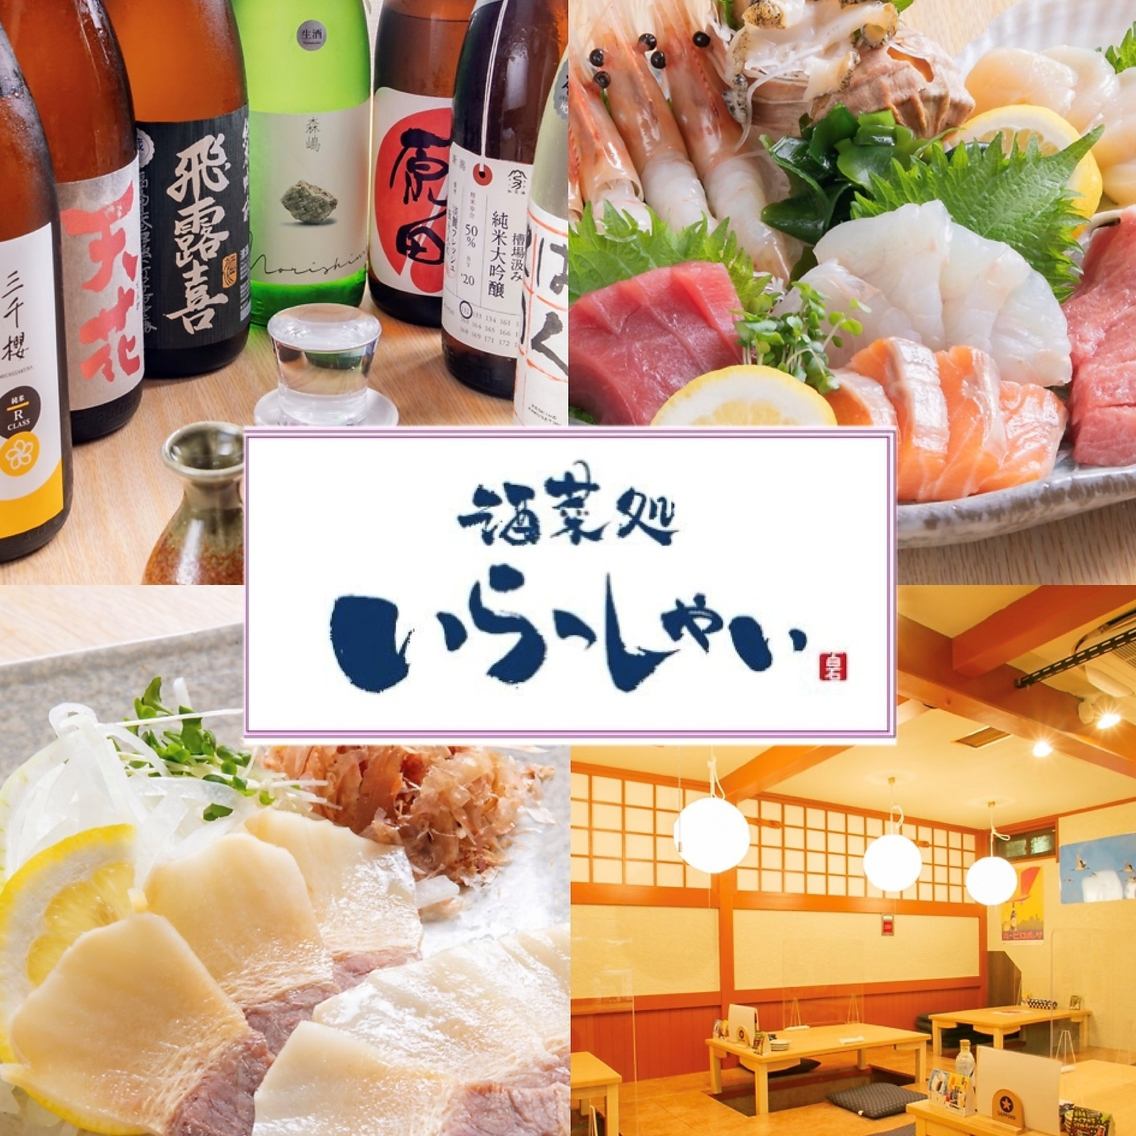 You can enjoy fresh seafood and sake carefully selected by the manager who loves sake ◎